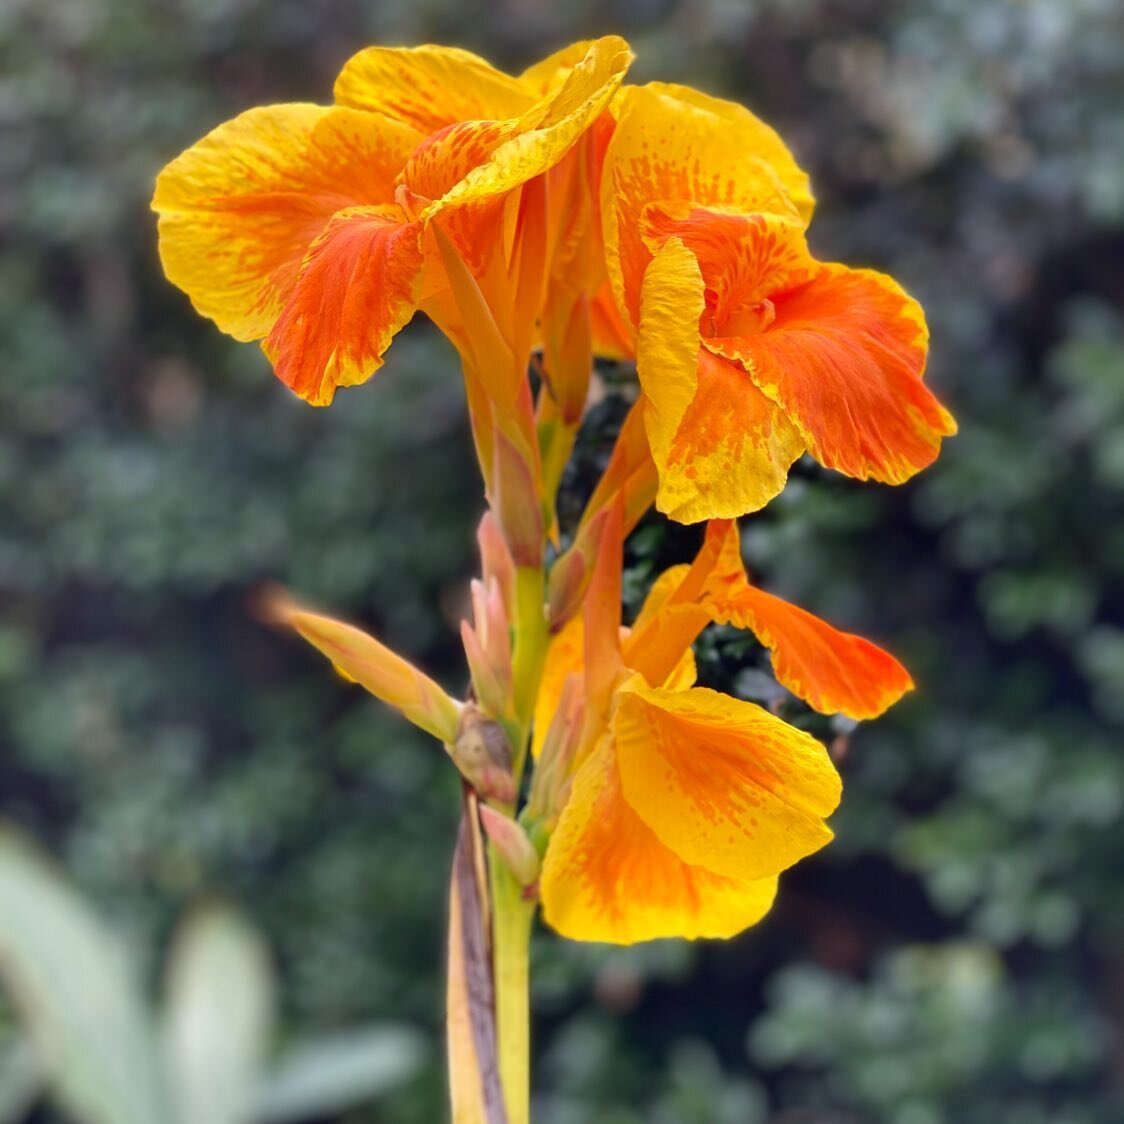 | Canna lily |
This unique type of flower compliments green foliage in outdoor gardens. Their full potential is seen during the summer months #beyondthegate #beyondthegatelandscaping #sydneylandscaper #cannalily #cannalillies